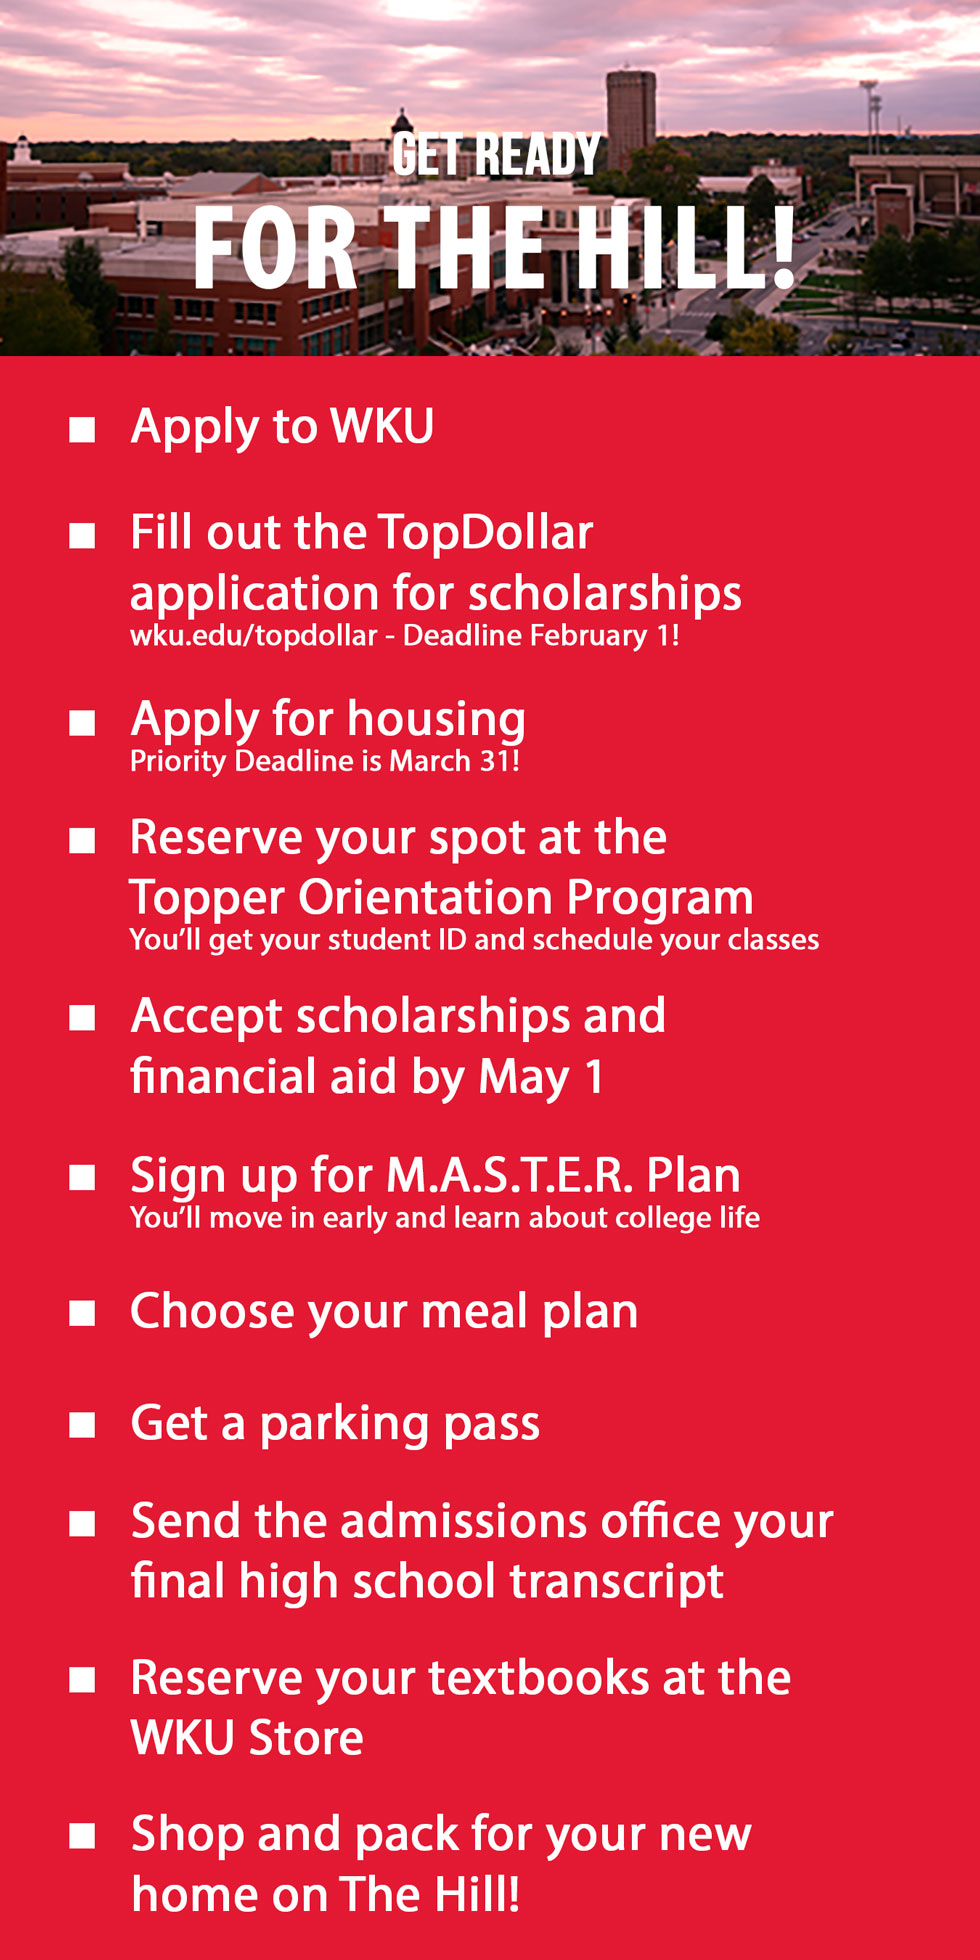 get ready for the hill. apply to wku. fill out Top Dollar application. apply for housing. go to TOP. accept scholarships. sign up for master plan. choose a meal plan. get a parking pass. send us your final high school transcript. reserve your books at the wku store. shop and pack for your new home on the hill